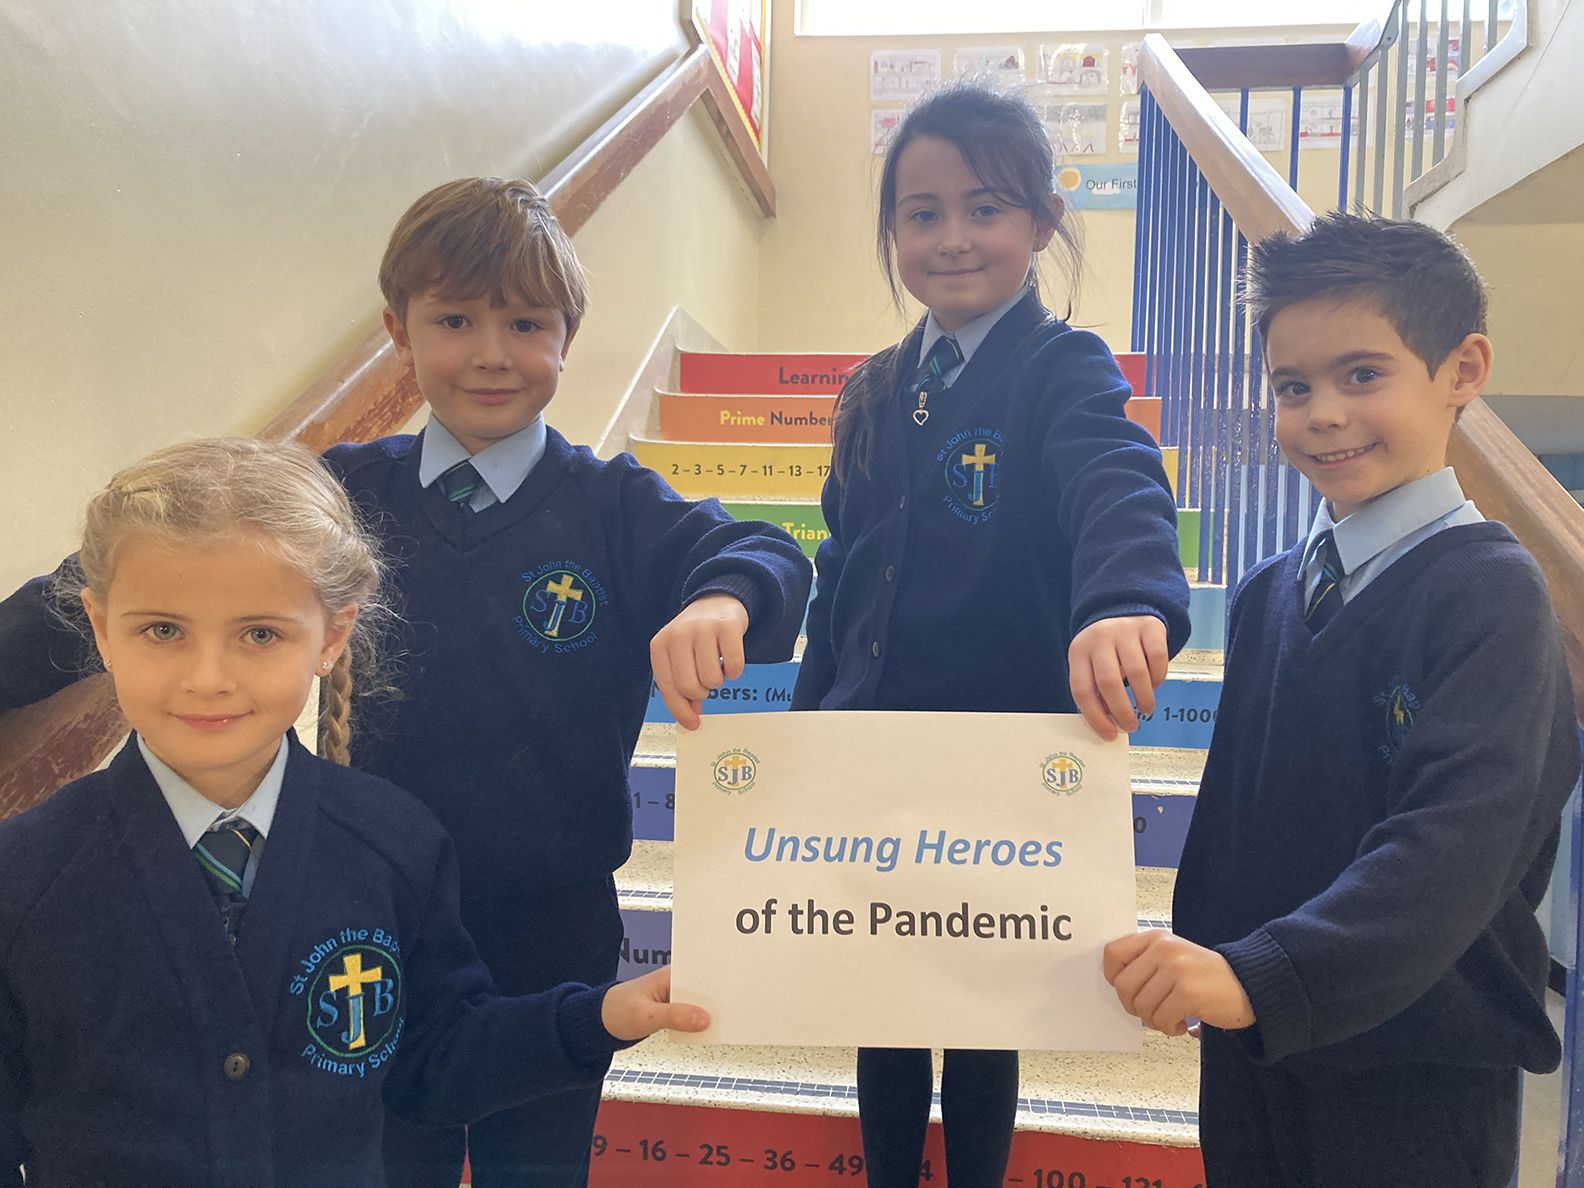 St John the Baptist pupils celebrate being nominated in the 2020 Aisling Awards in the ‘Unsung Heroes of the Pandemic’ category